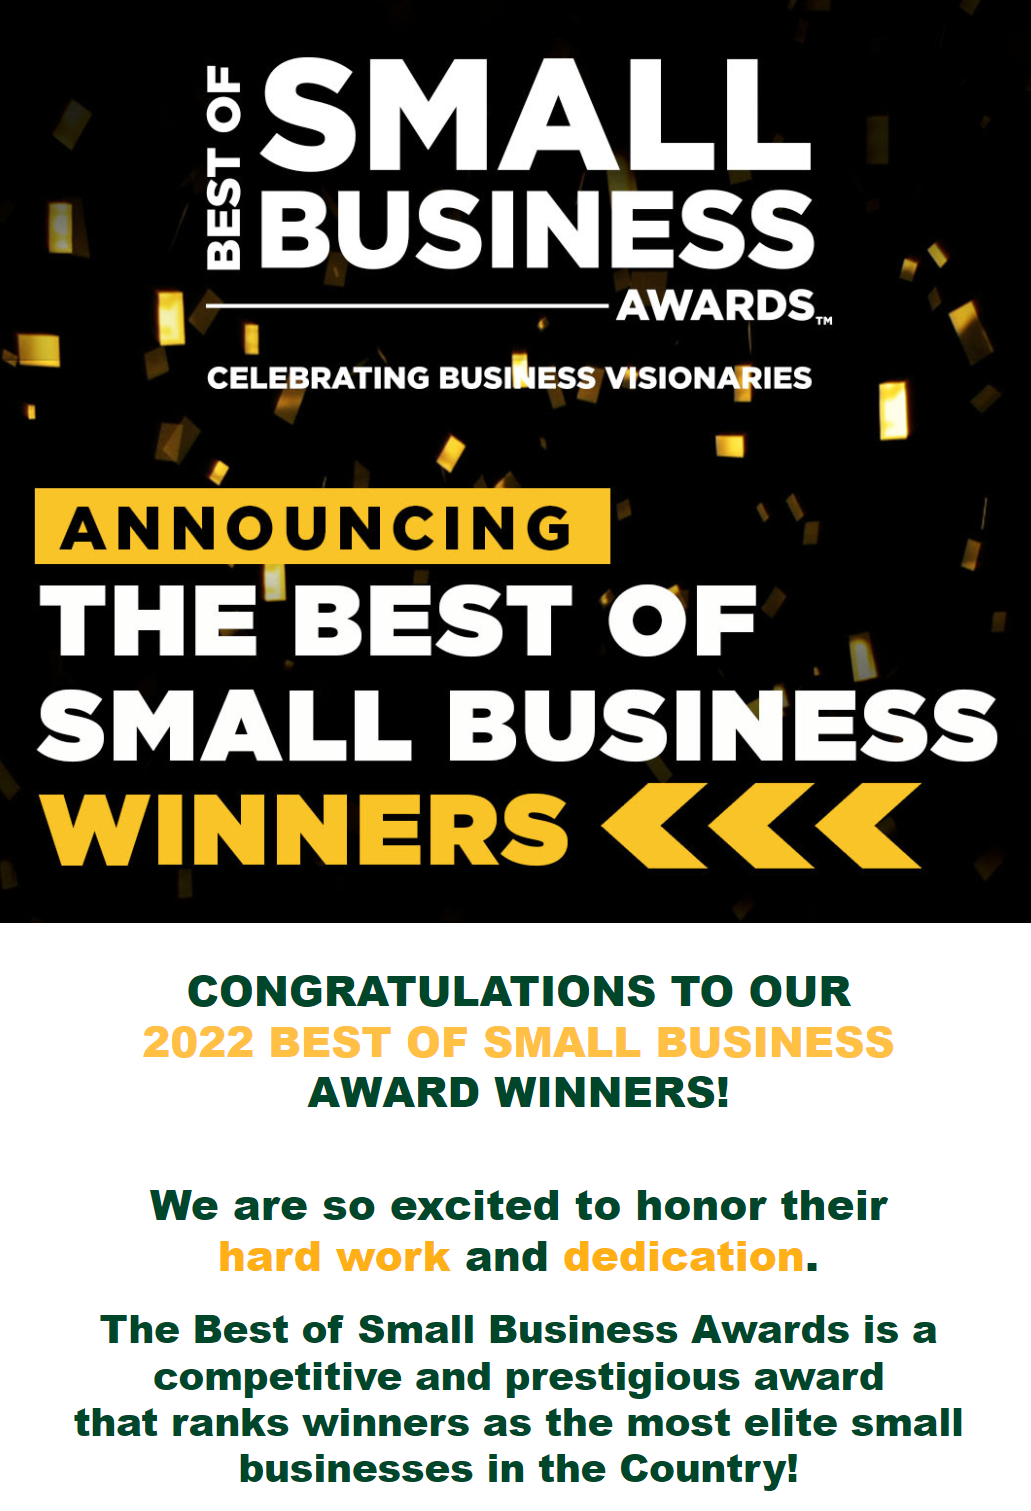 Your Home Sold Guaranteed Realty Has Won The Prestigious SB100 Award At THE BEST OF SMALL BUSINESS AWARDS